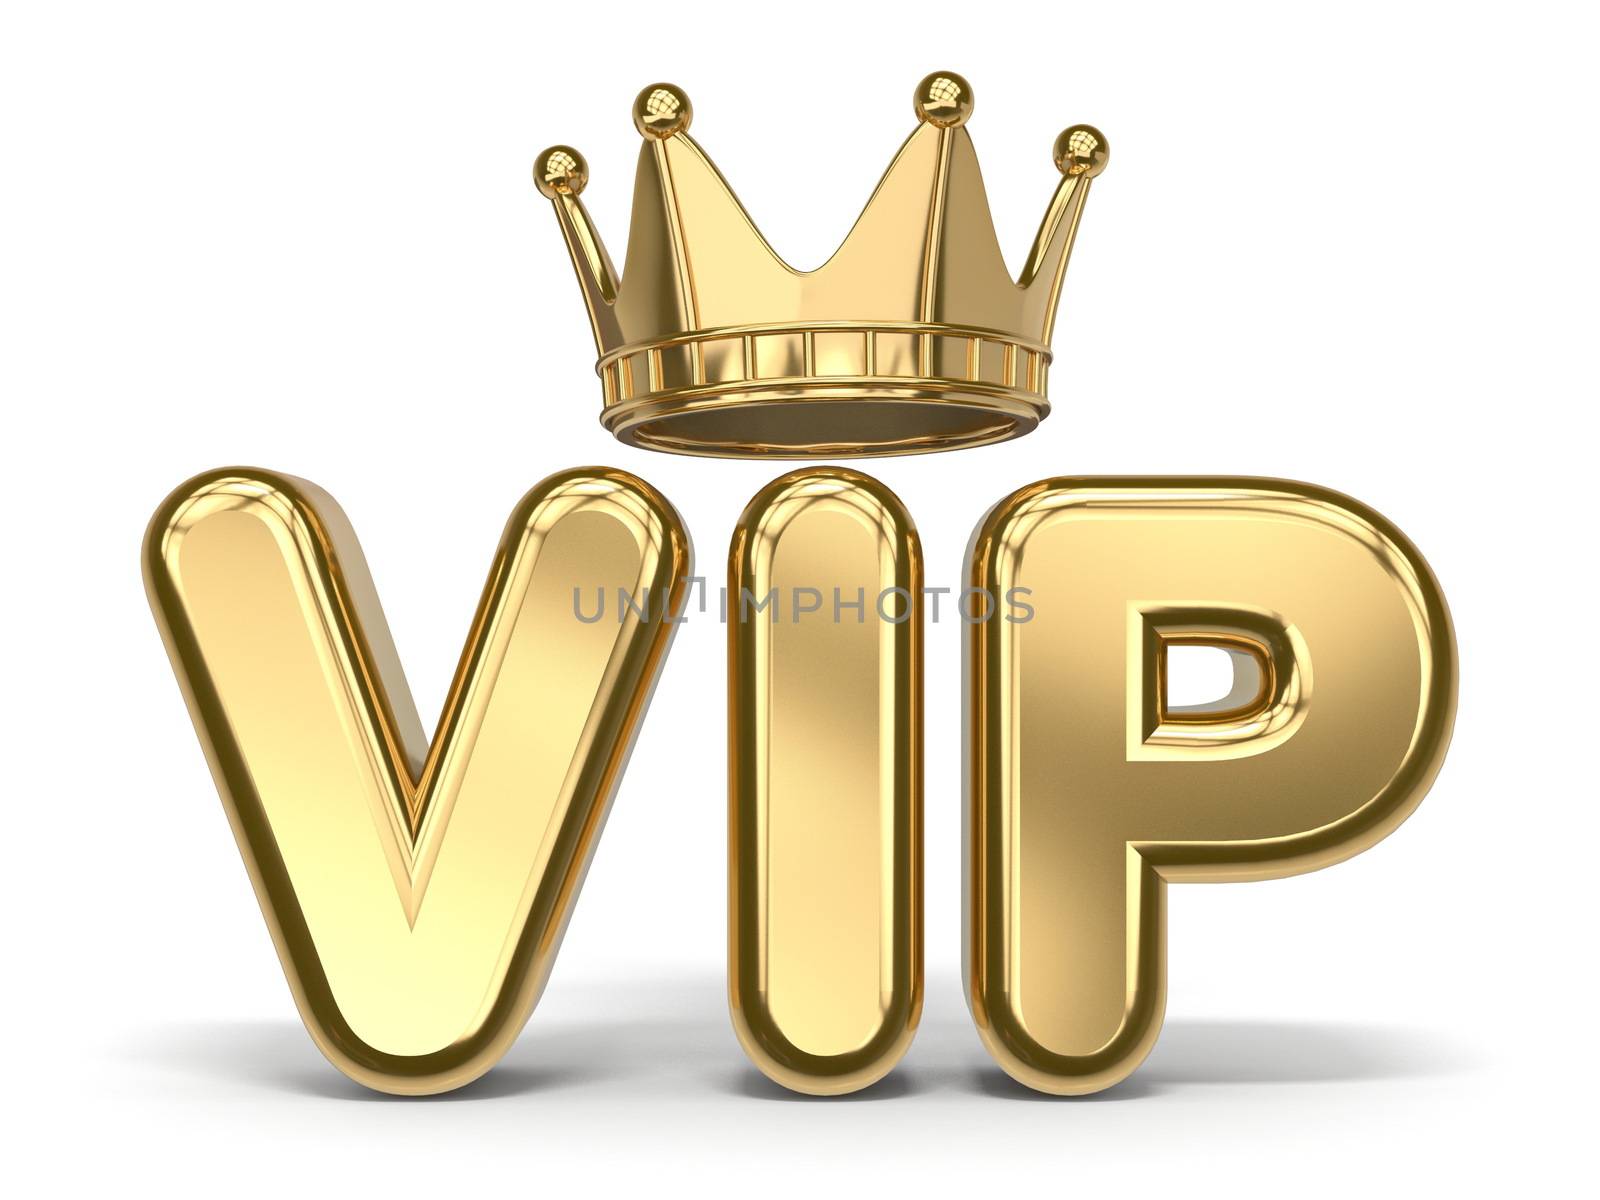 VIP text with golden crown 3D render illustration isolated on white background